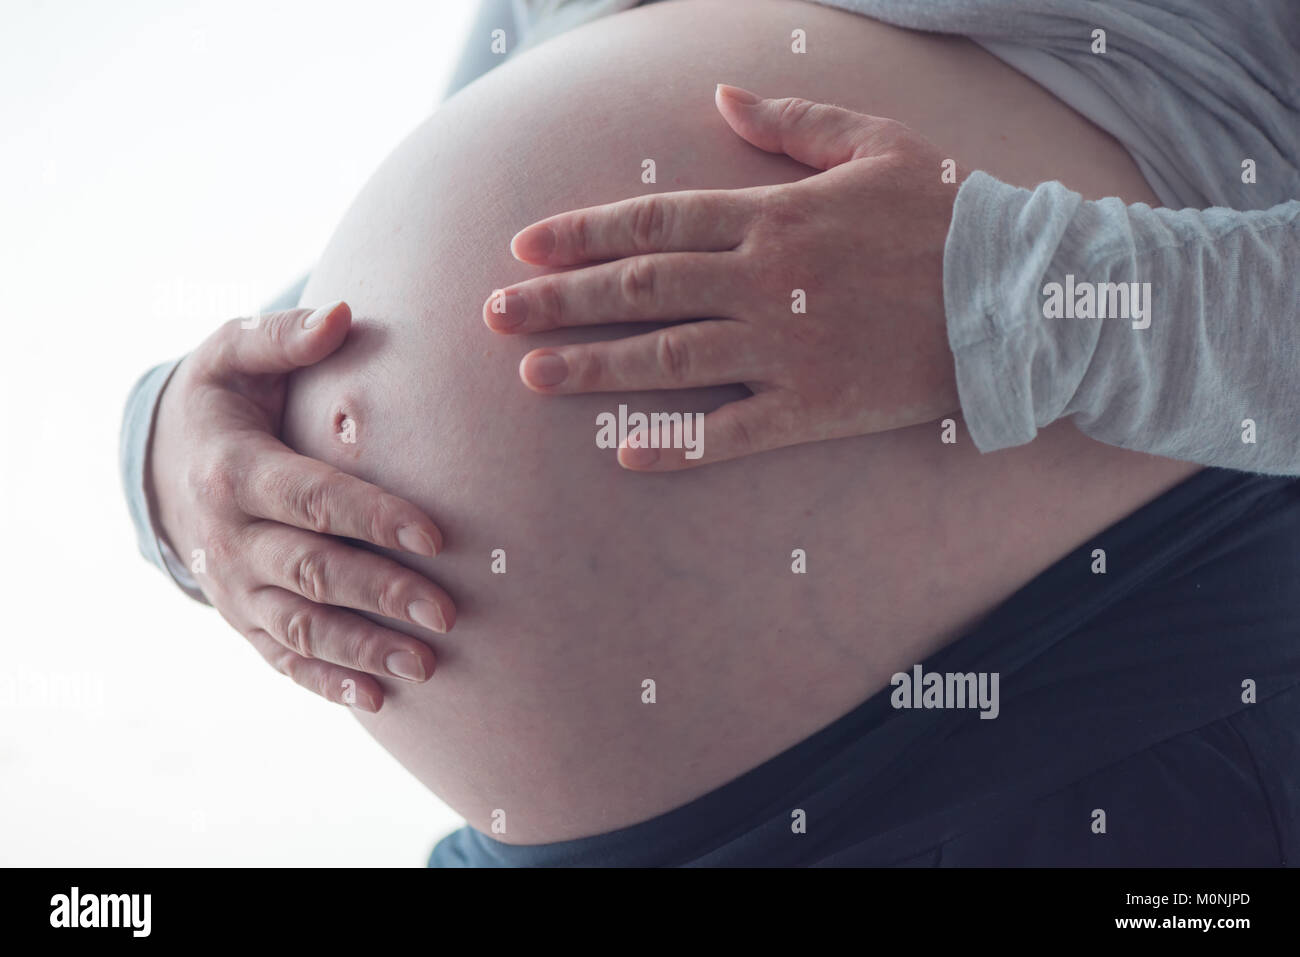 Pregnant woman tummy, female person in ninth month of pregnancy posing Stock Photo